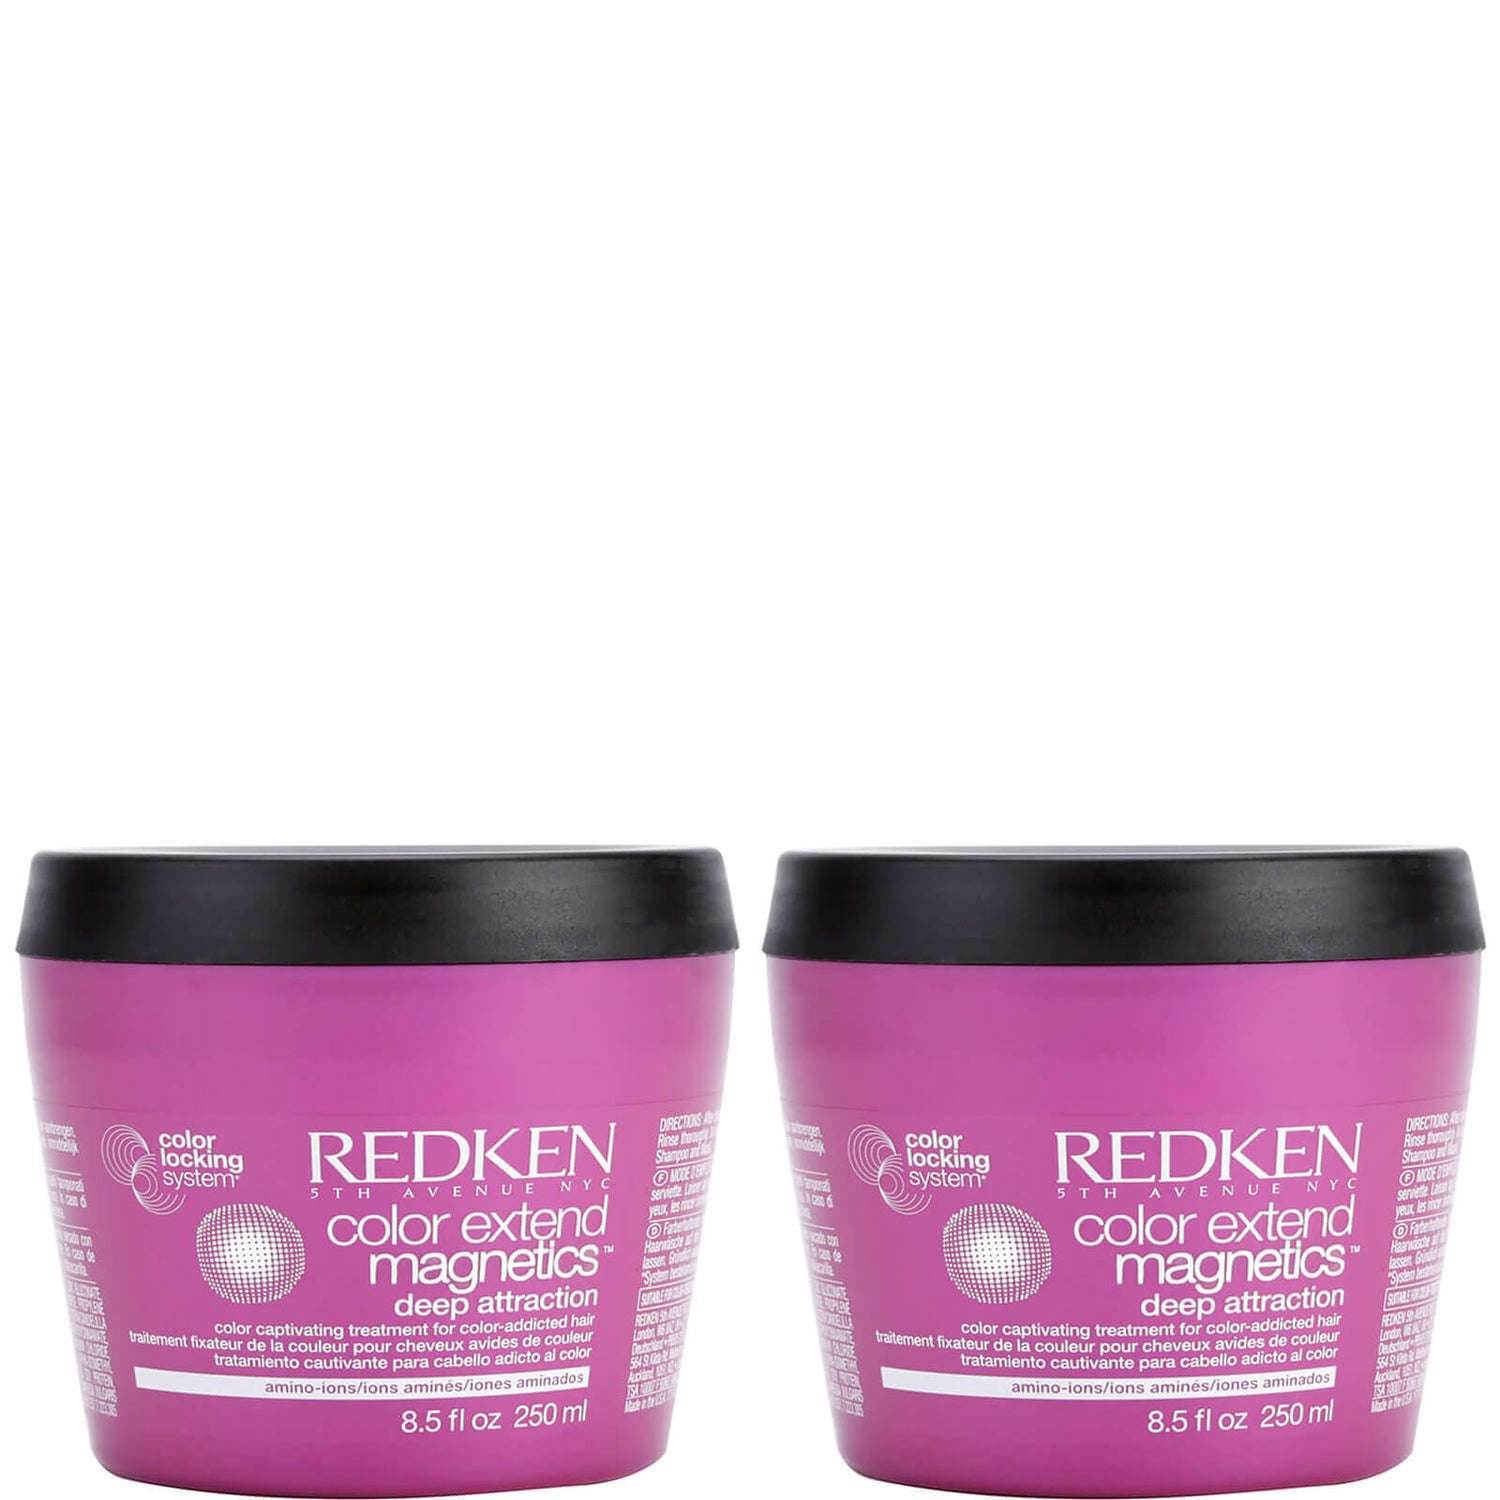 Redken Color Extend Magnetic Mask Duo 2 x 250ml